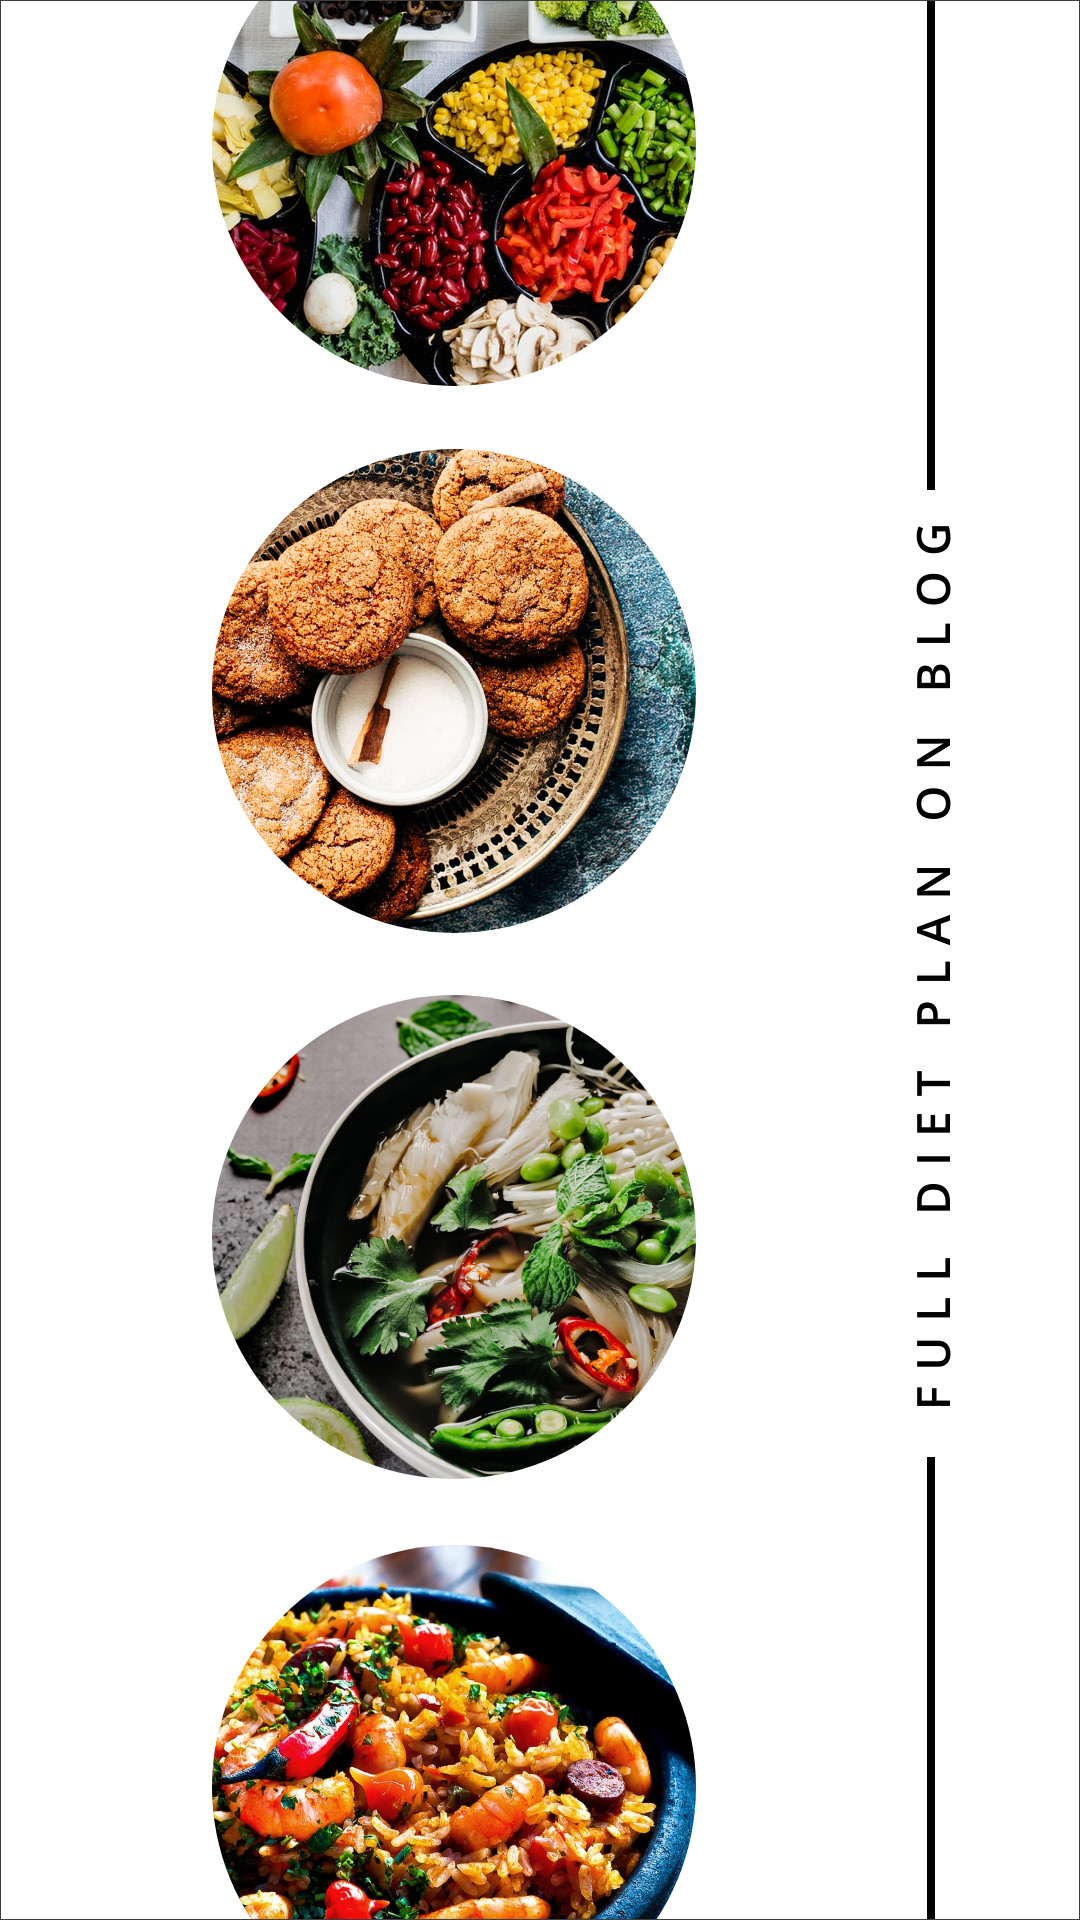 Full Diet Plan - Blog and lifestyle